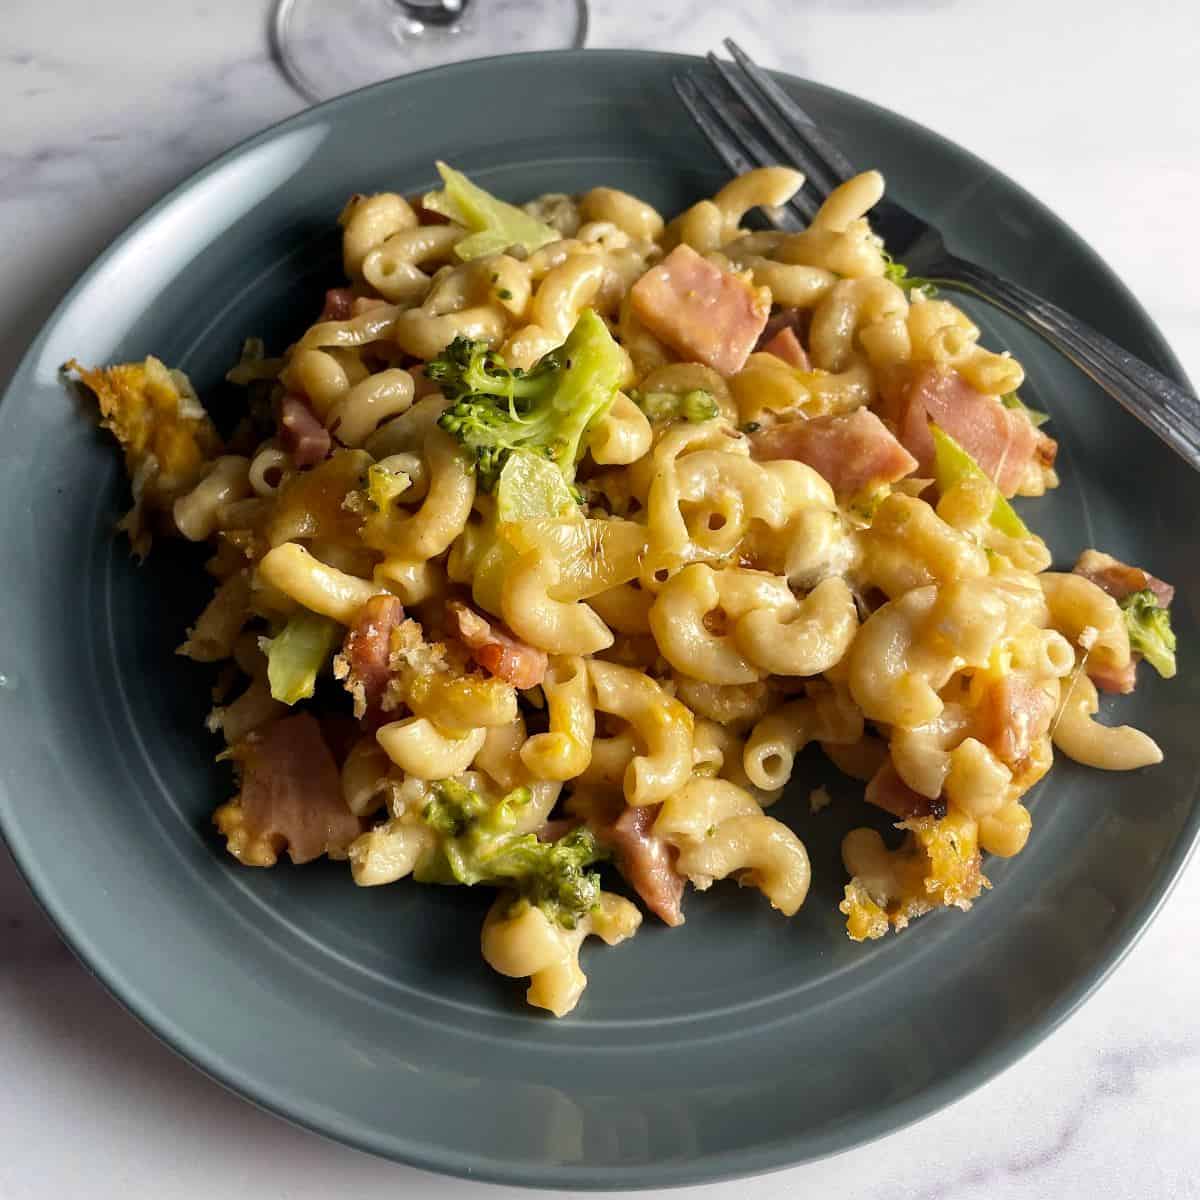 ham and cheese pasta bake on a drak gray plate.